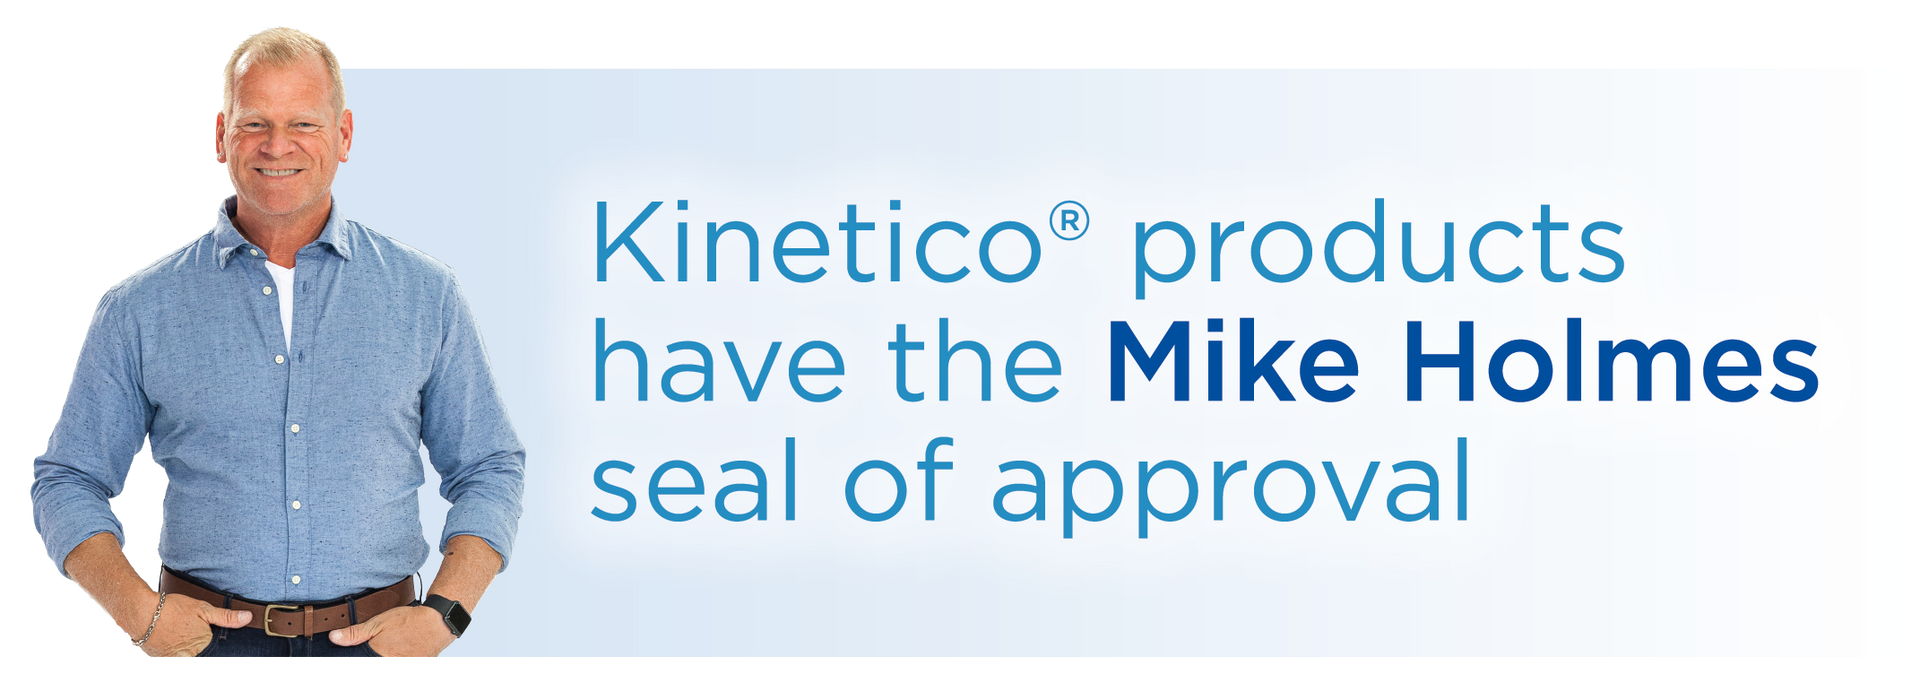 Mike Holmes Seal of Approval for Kinetico